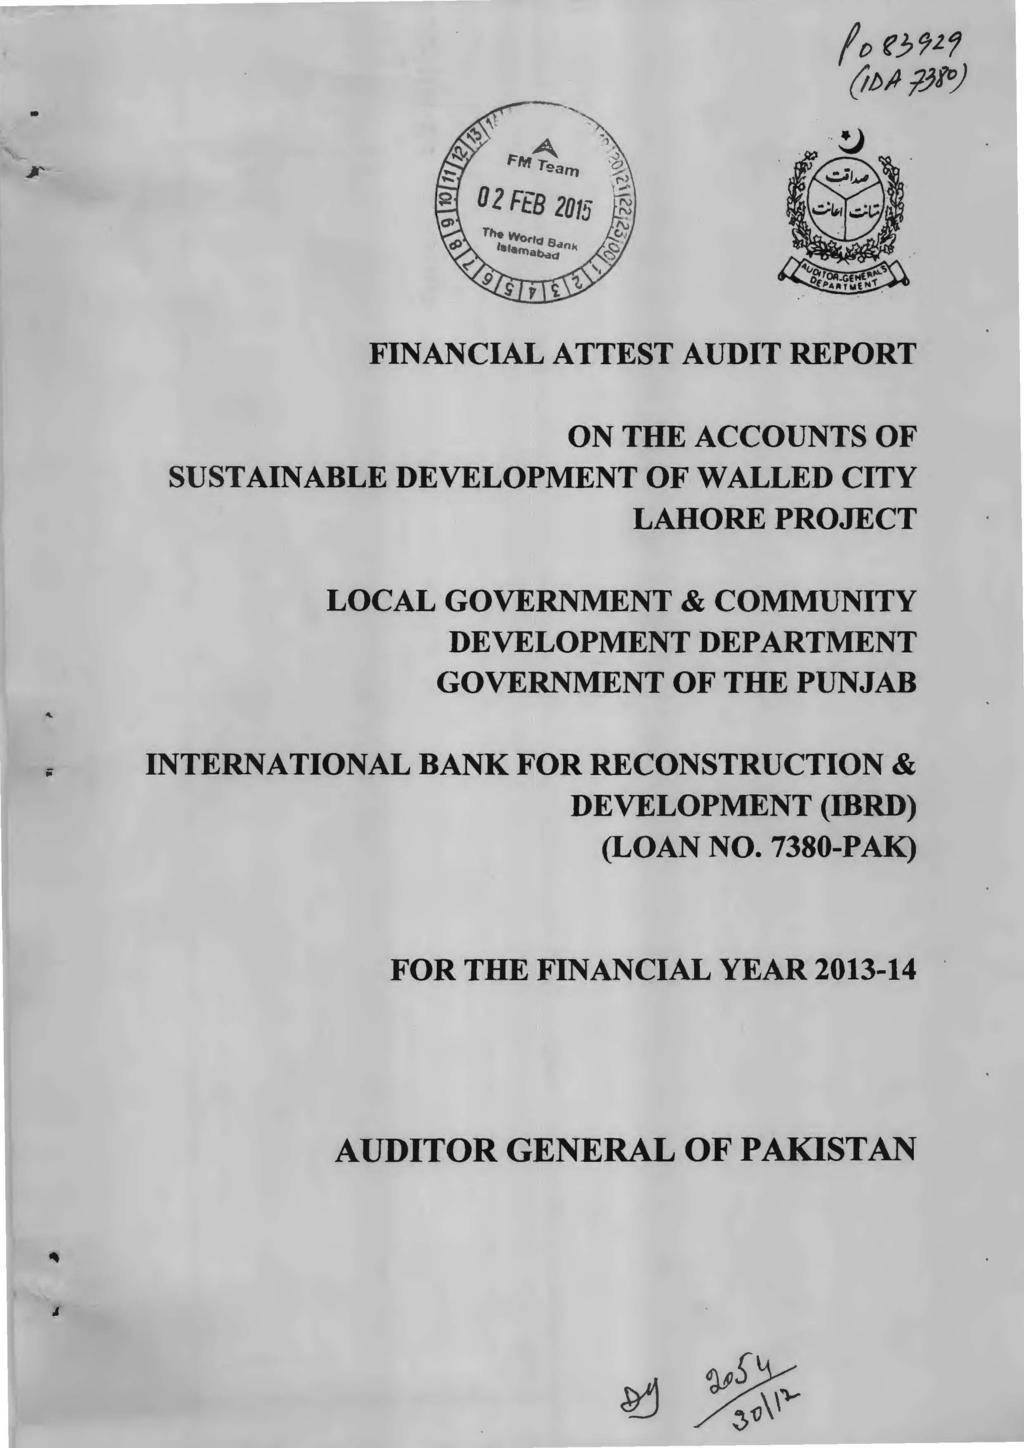 Public Disclosure Authorized a 2FEB 2015 Public Disclosure Authorized FINANCIAL ATTEST AUDIT REPORT ON THE ACCOUNTS OF SUSTAINABLE DEVELOPMENT OF WALLED CITY LAHORE PROJECT Public Disclosure